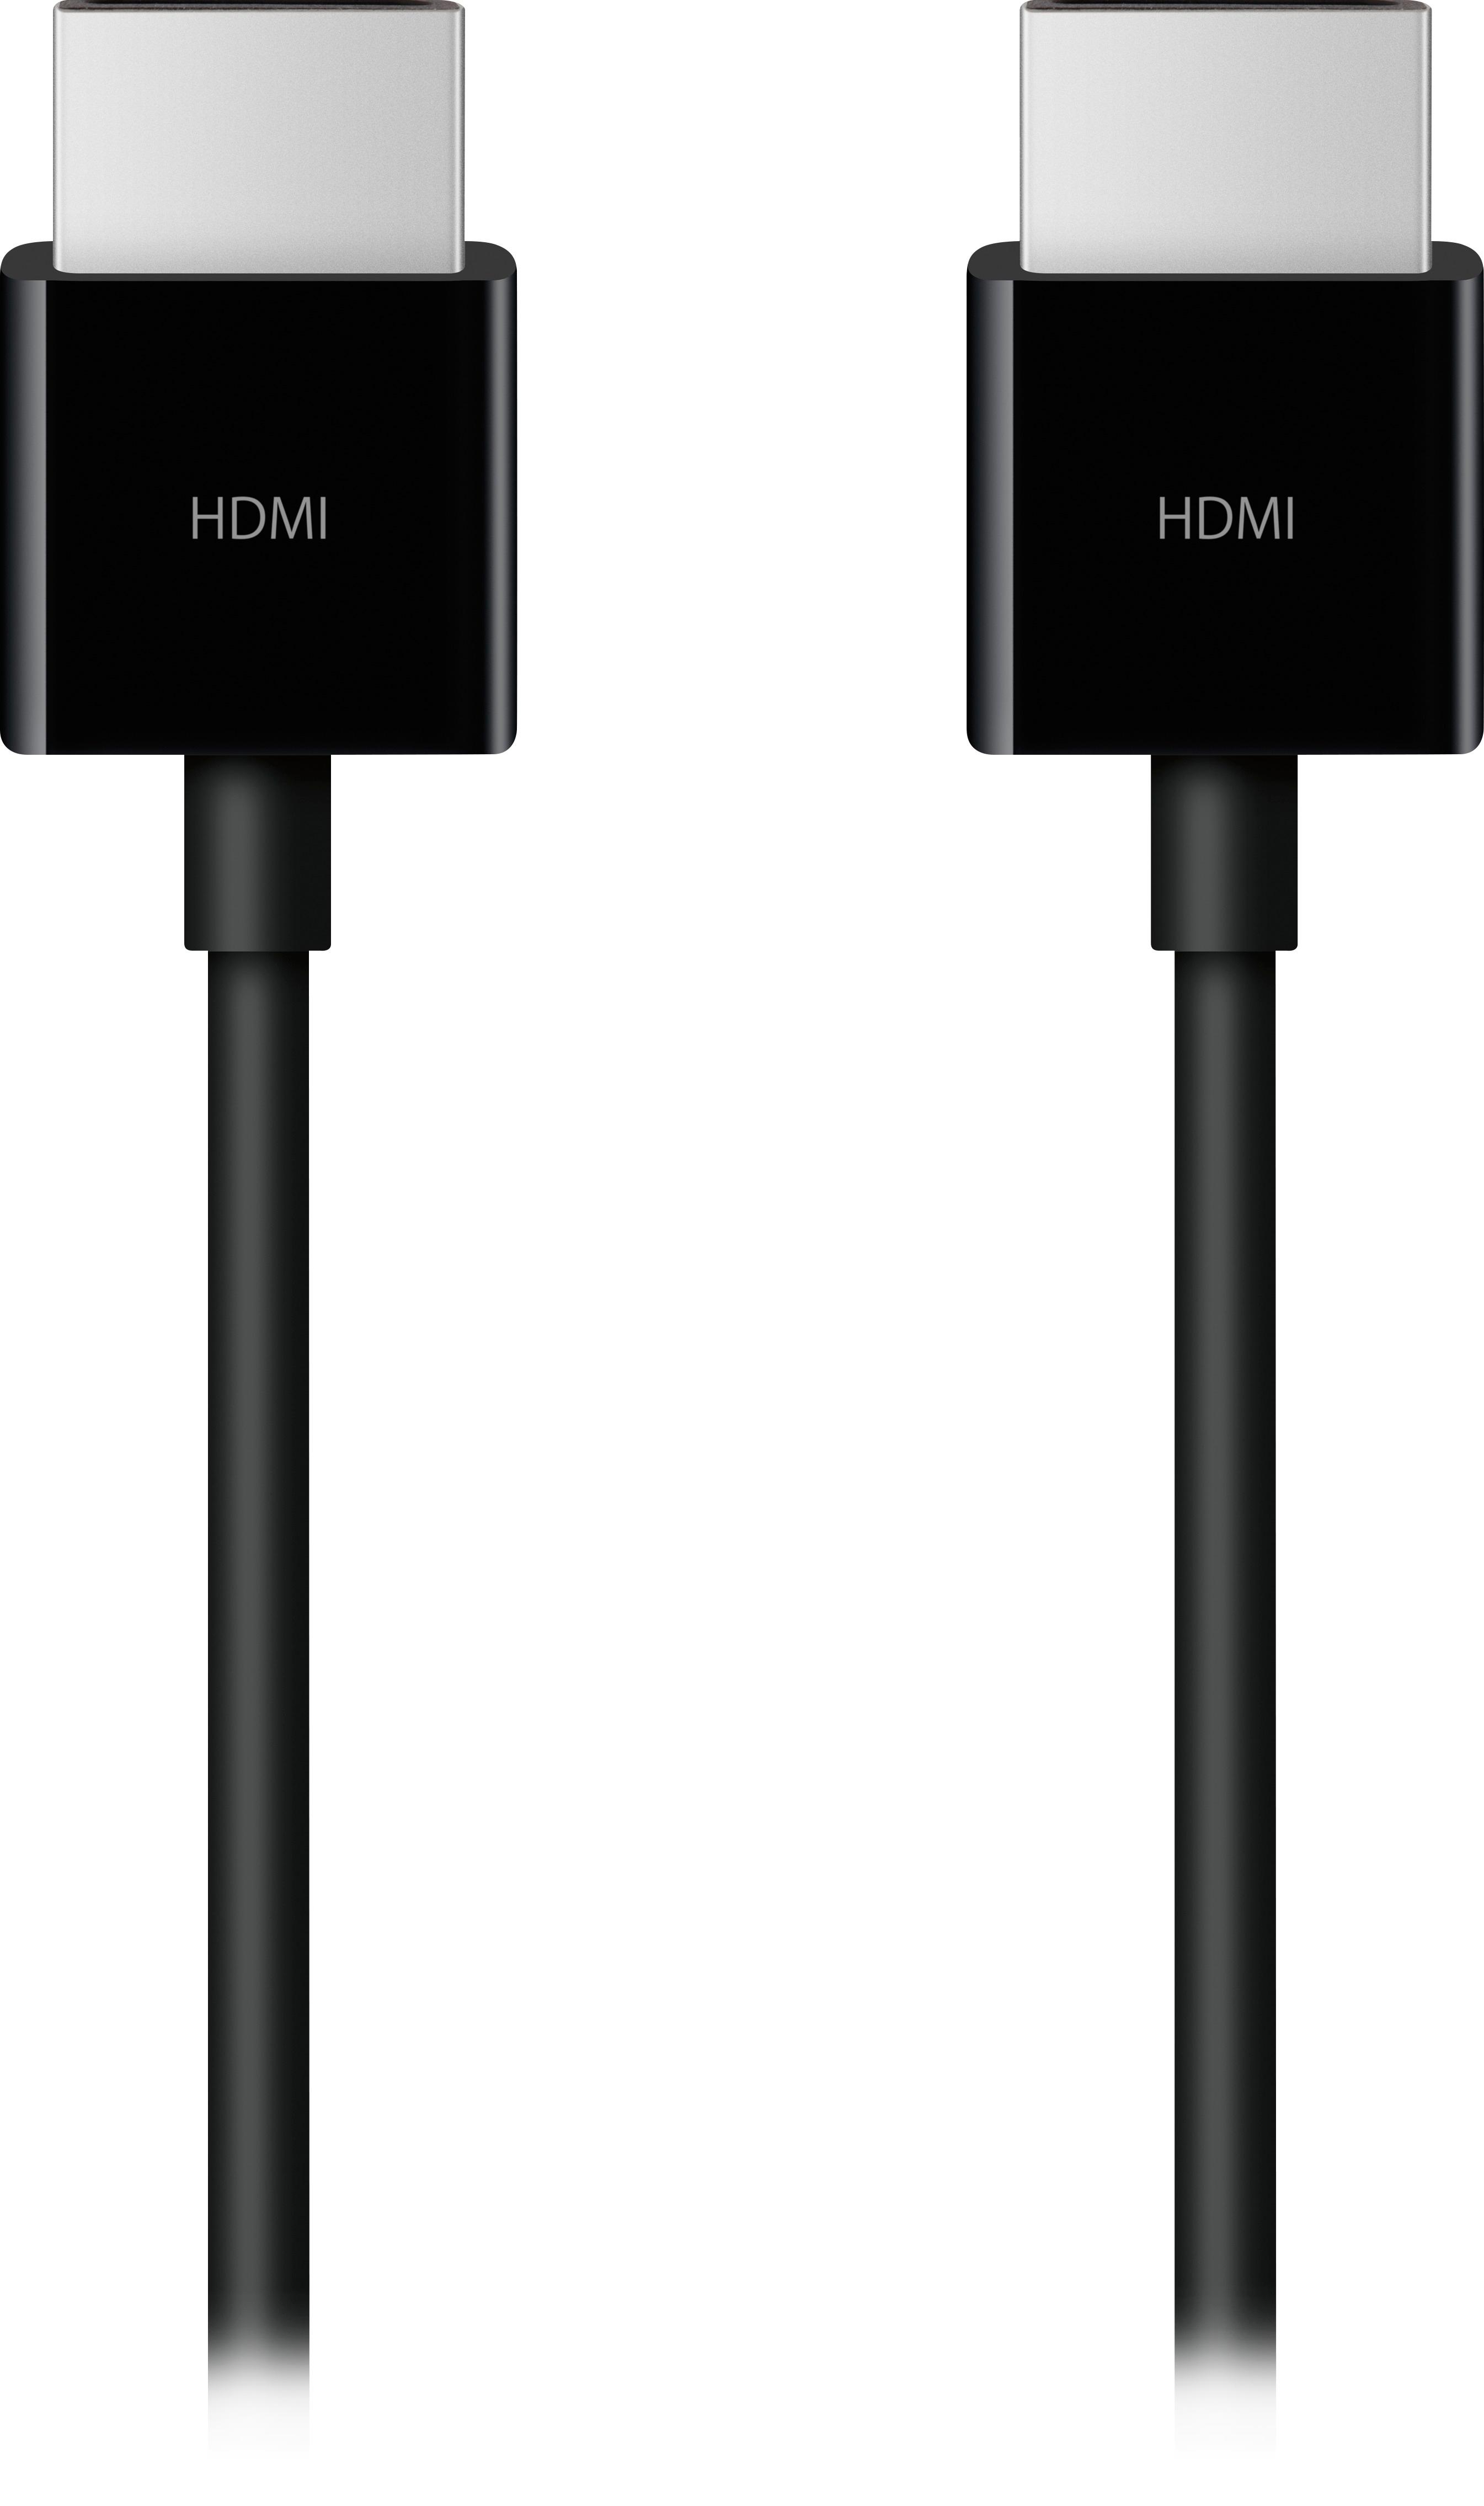 Apple HDMI to HDMI cable - 1.8 m - Apple accessories - LDLC 3-year